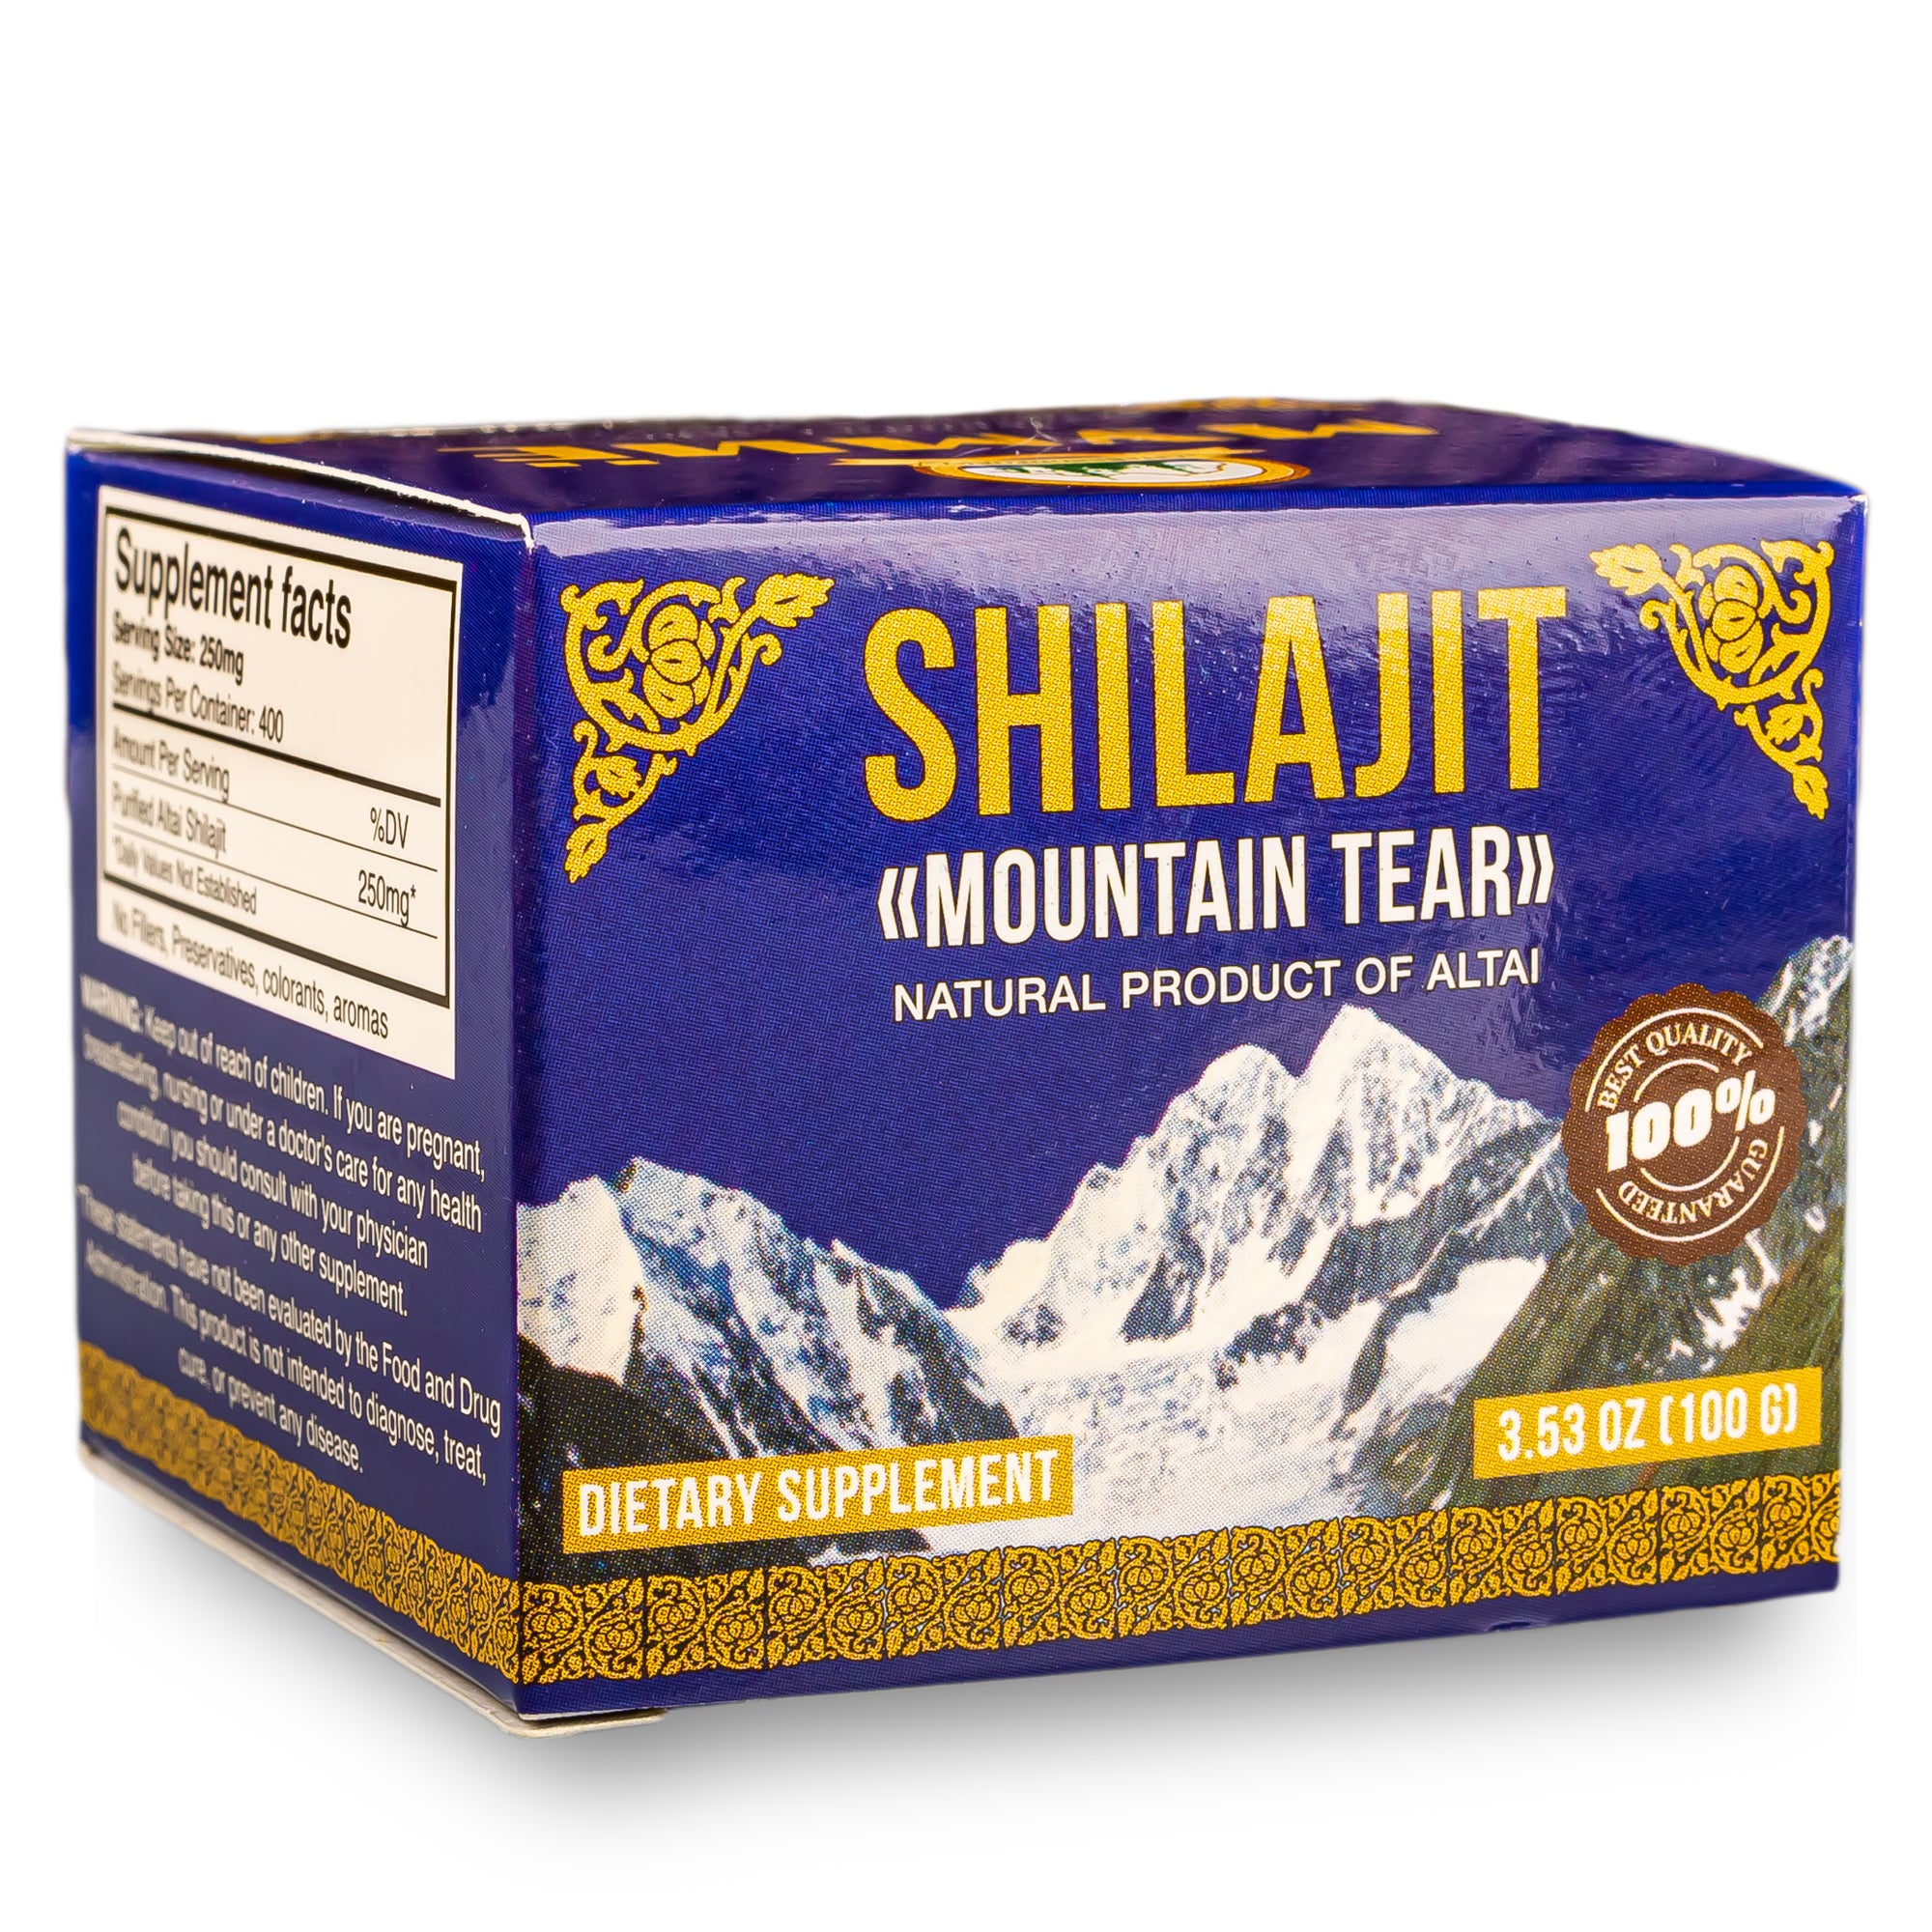 Can Shilajit be used for weight loss?